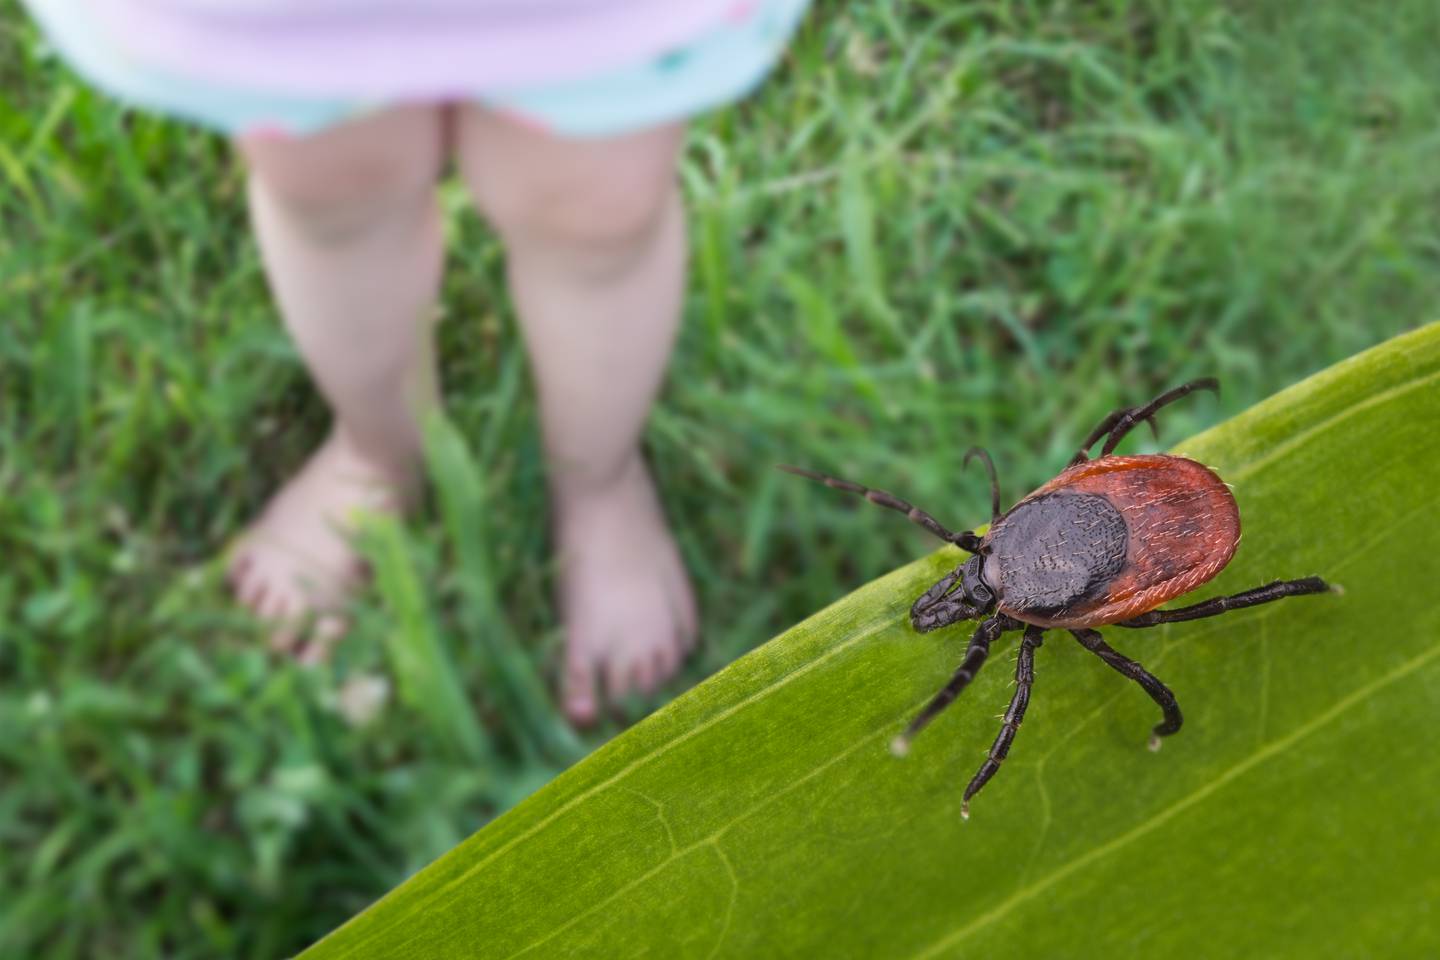 A deer tick in a yard as a child is playing.